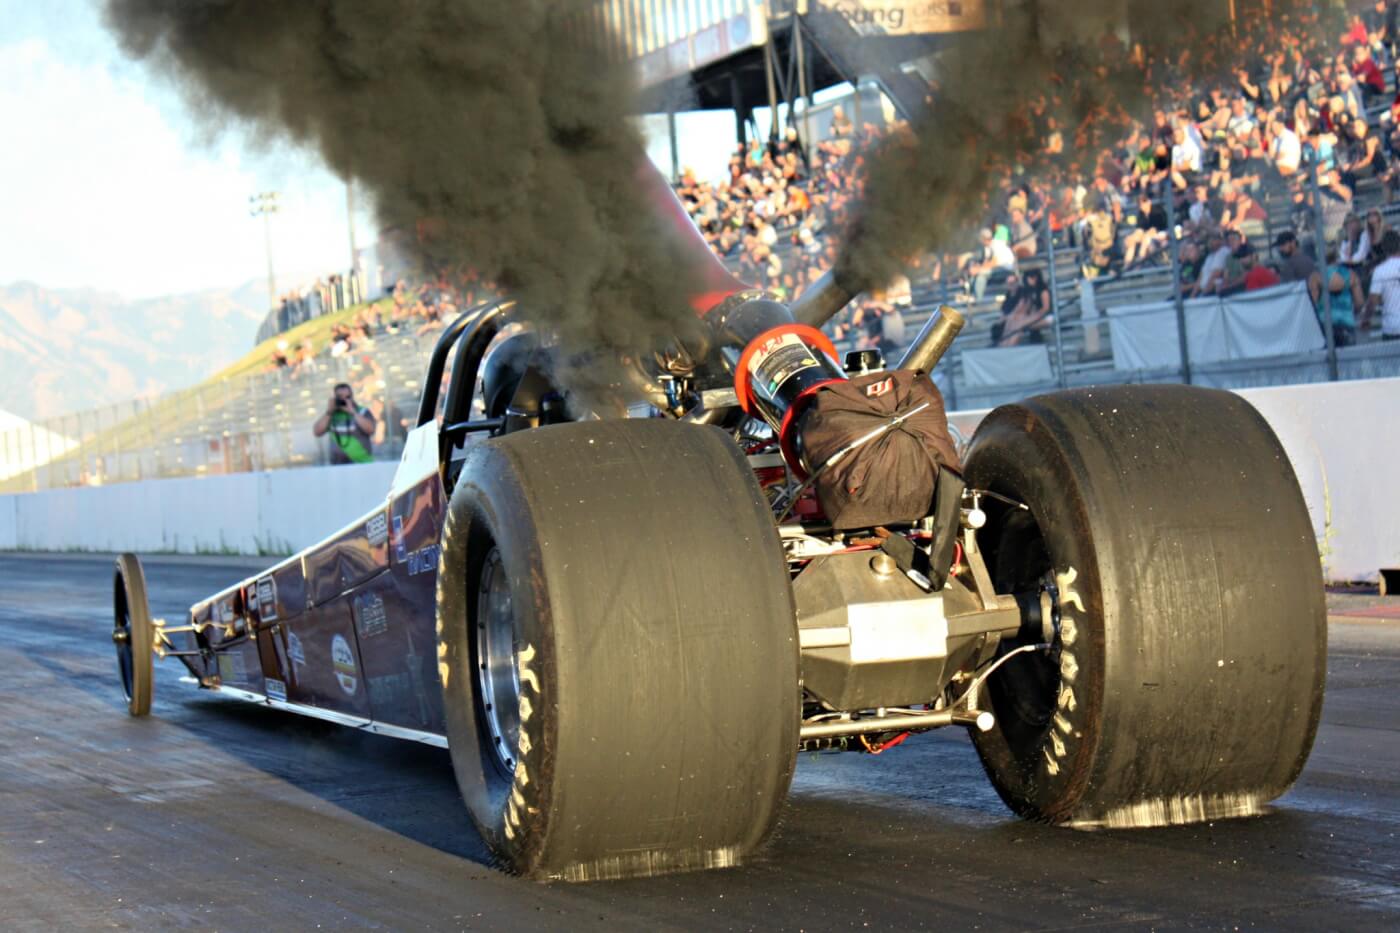 Greg Hogue brought out his Duramax-powered dragster to show the crowd the real potential of a diesel powerplant. Unfortunately, tuning issues and the high elevation prevented the car from making a full pass under max power.